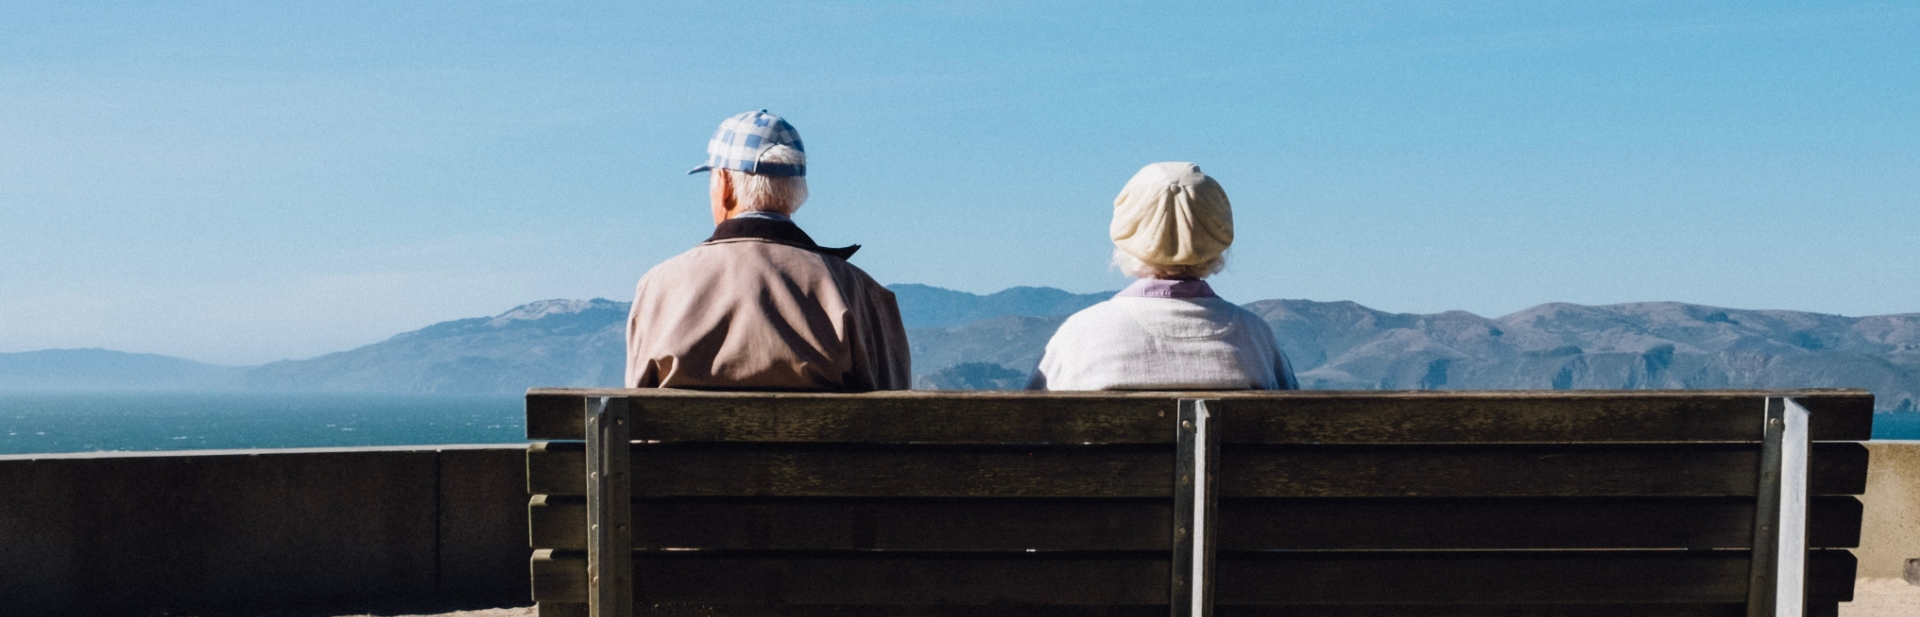 retired couple sitting on a bench together and viewing the landscape